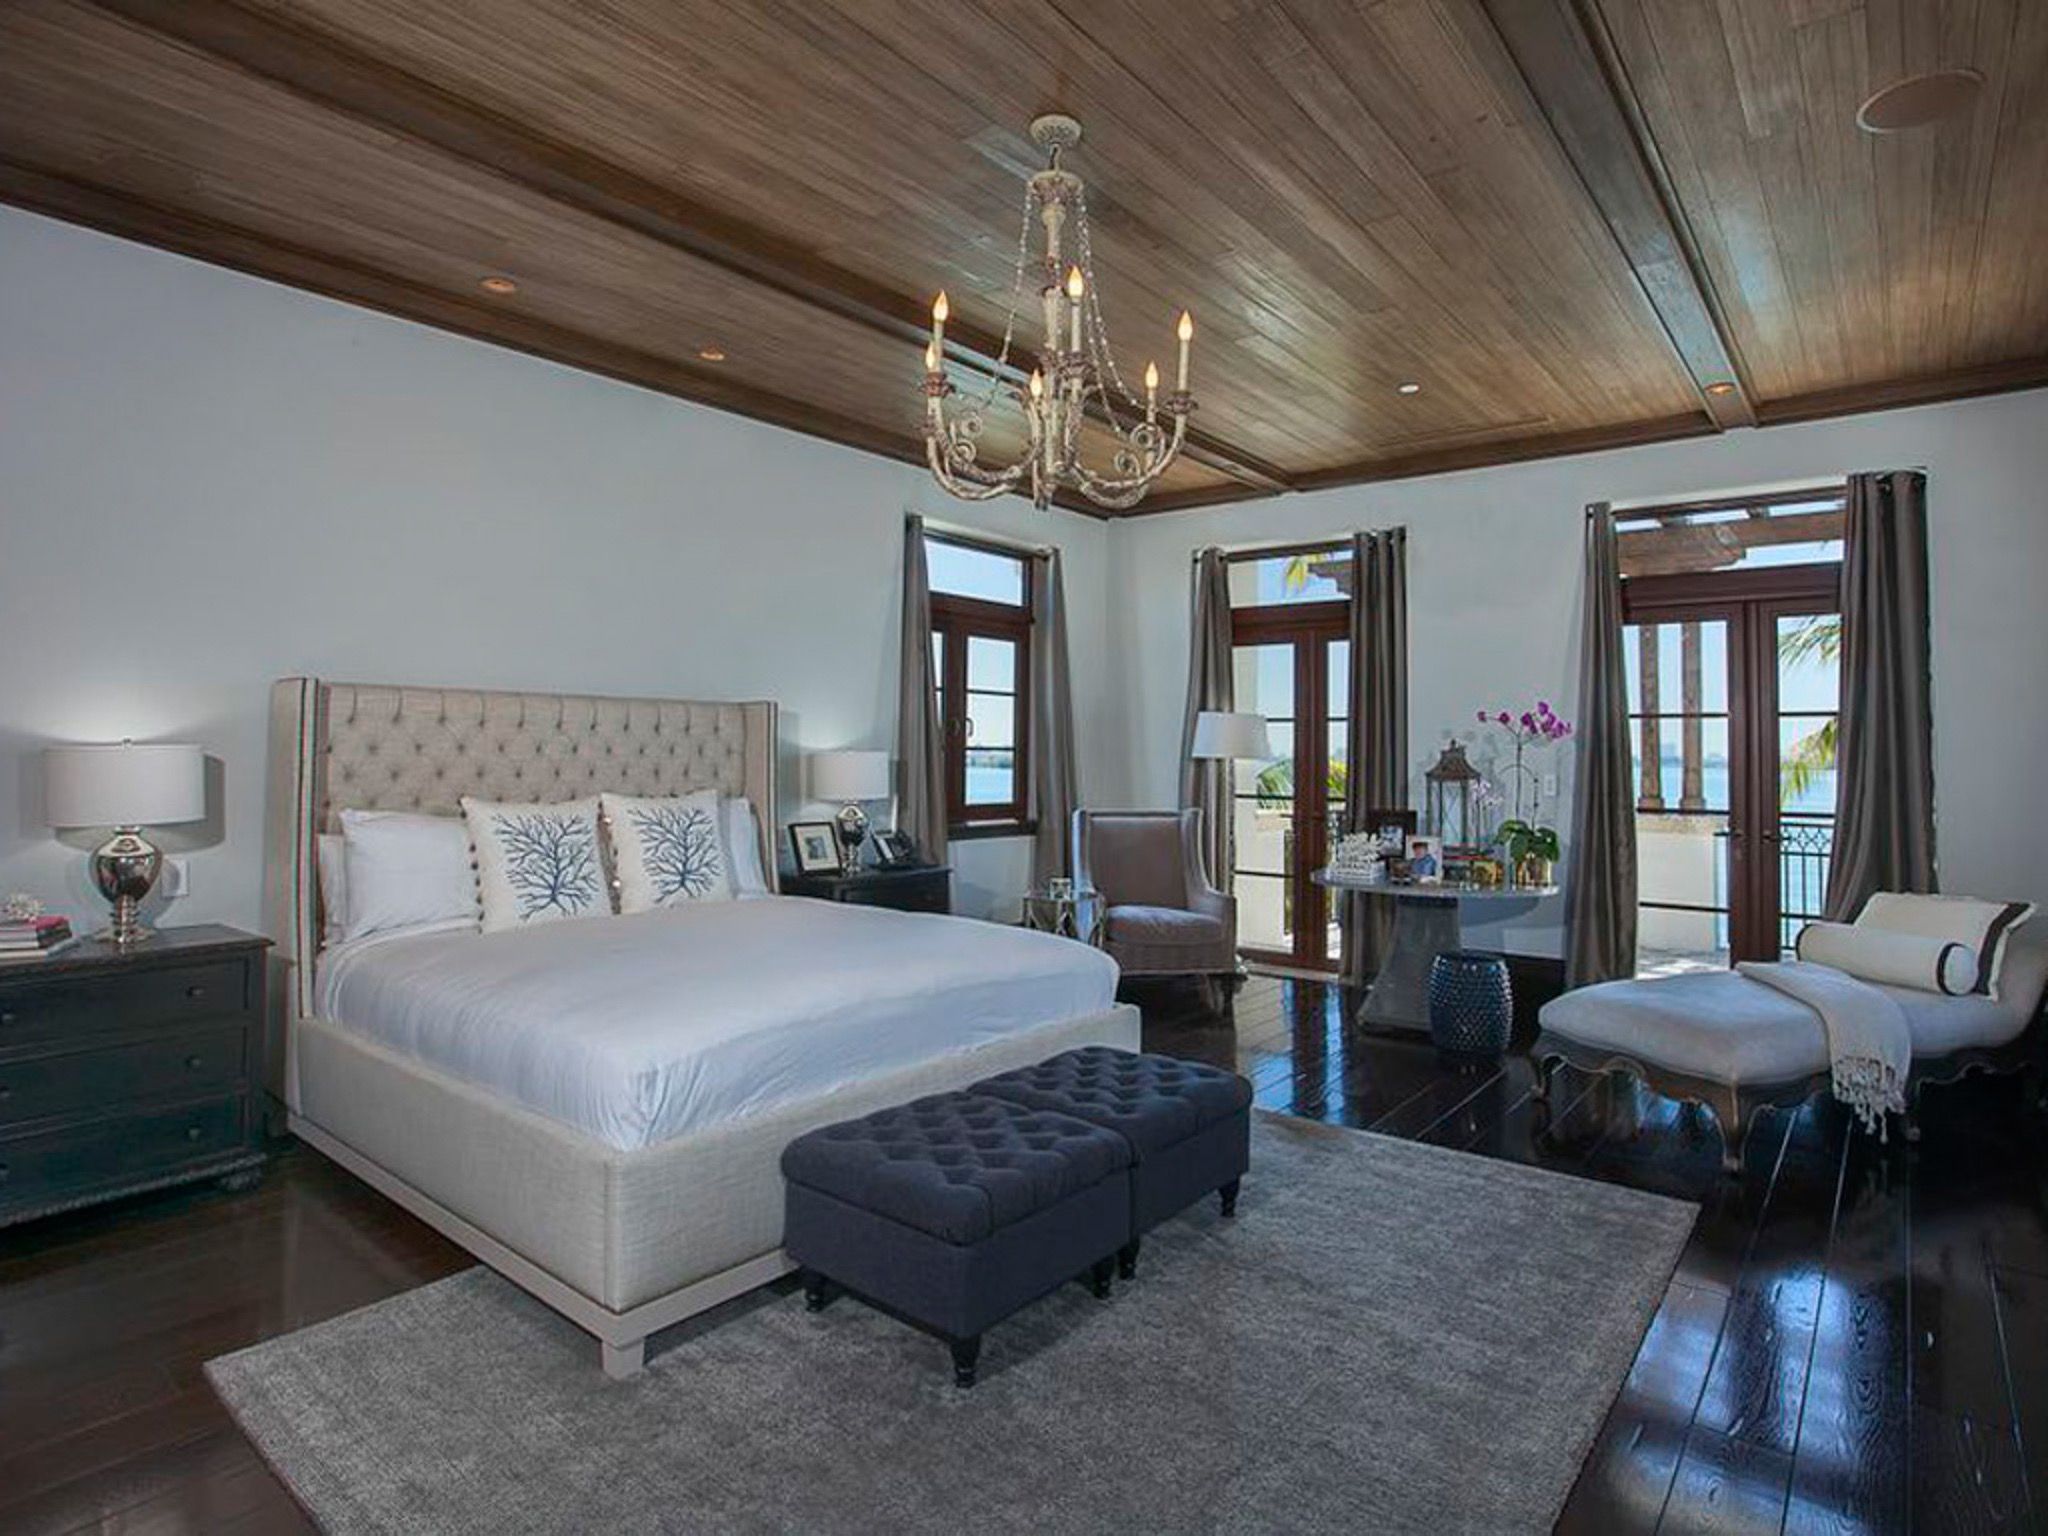 Mediterranean Master Bedroom Decoration Style (View 18 of 28)